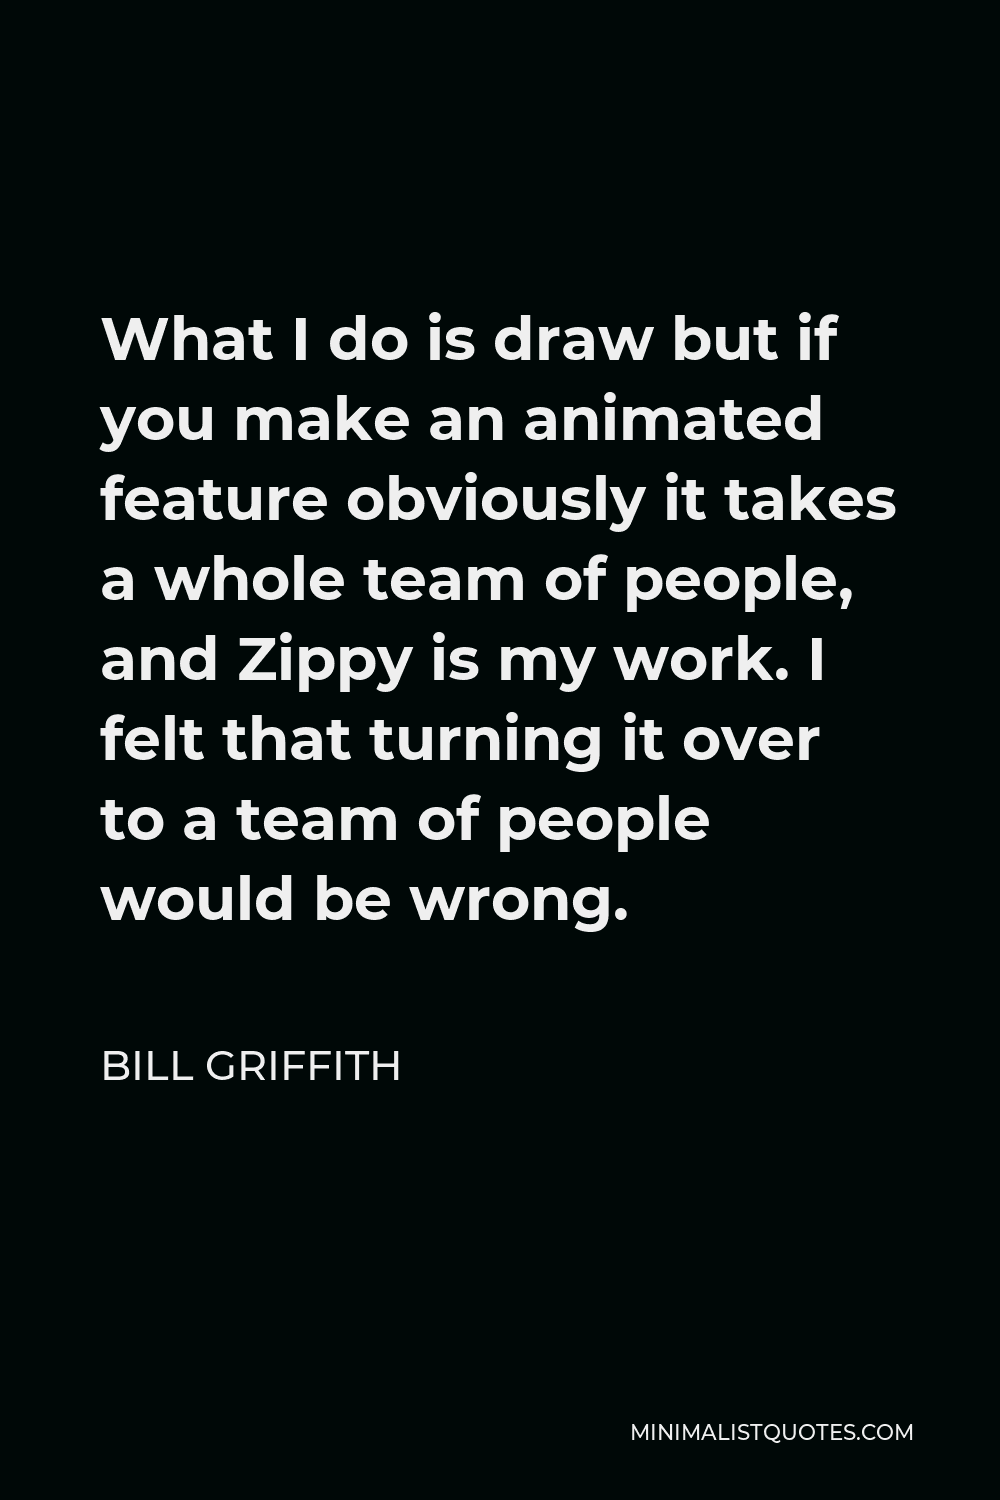 Bill Griffith Quote - What I do is draw but if you make an animated feature obviously it takes a whole team of people, and Zippy is my work. I felt that turning it over to a team of people would be wrong.